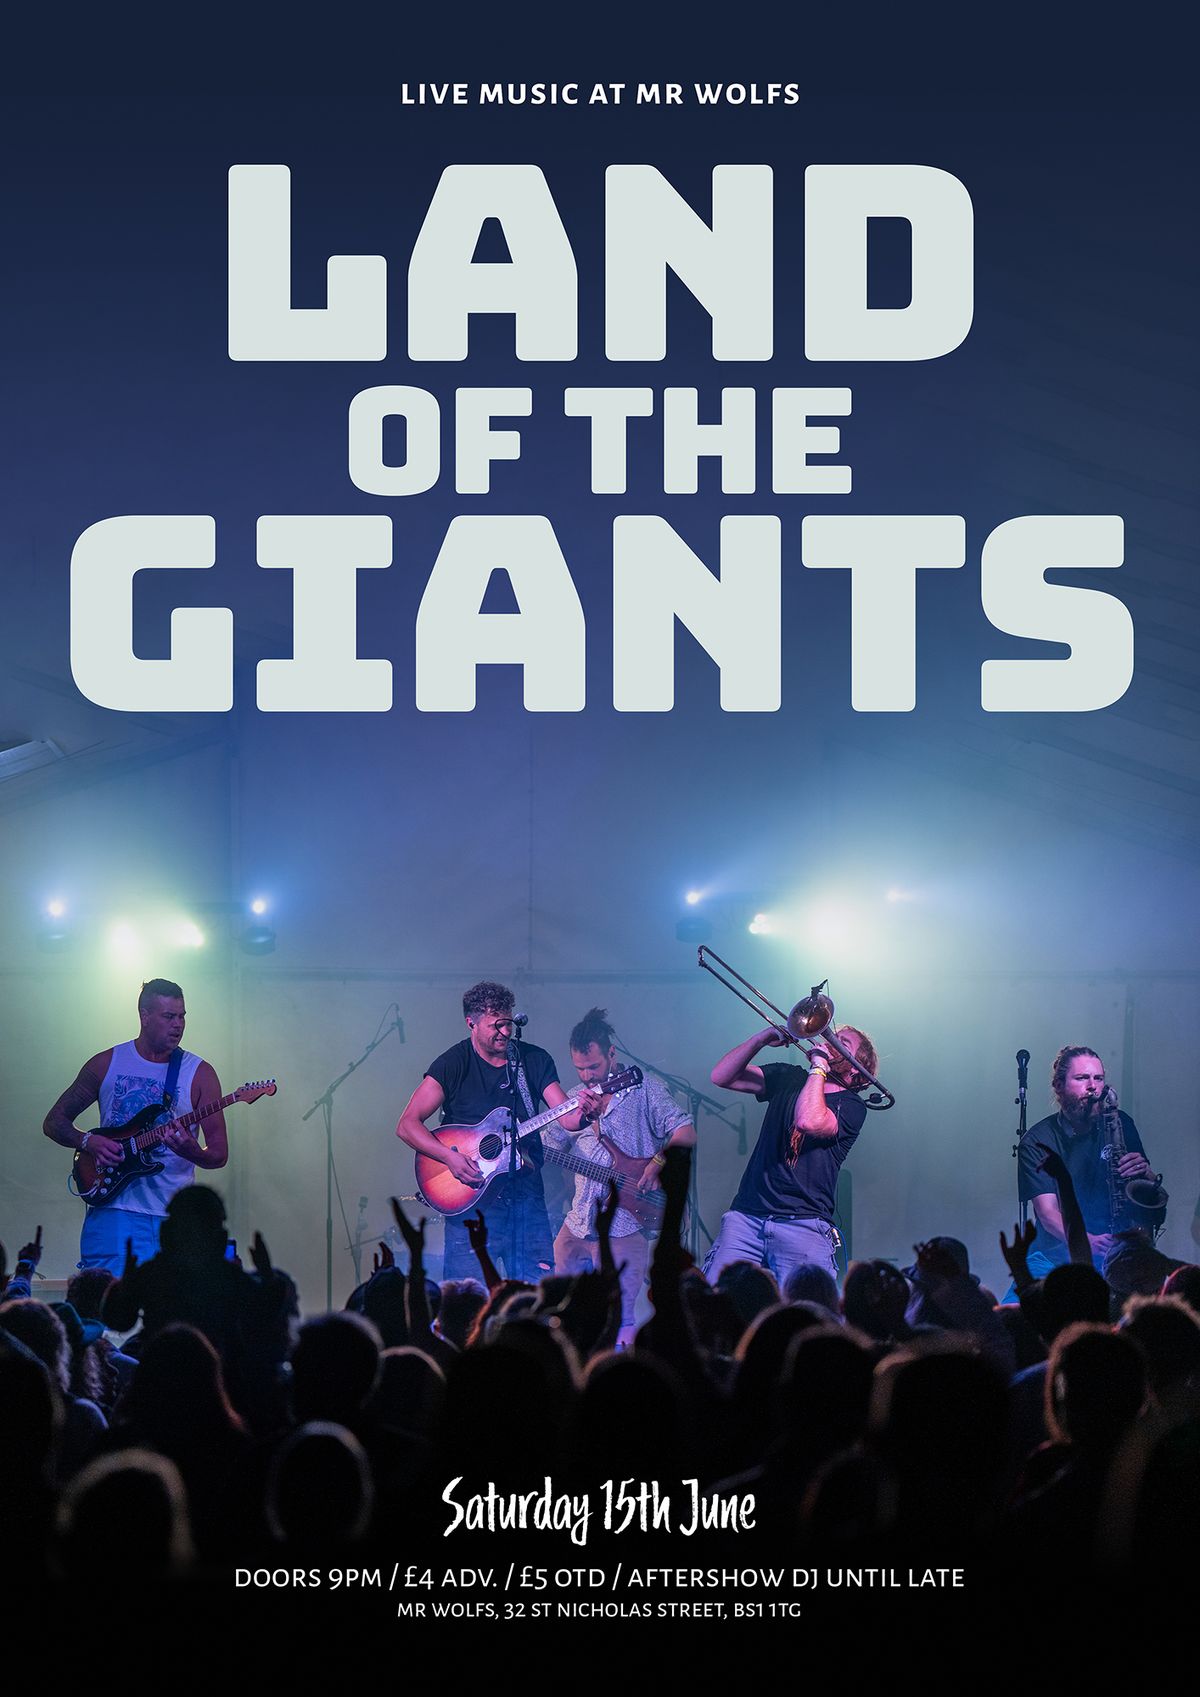 Land of the Giants @ Mr Wolf's, Bristol - Saturday 15 June